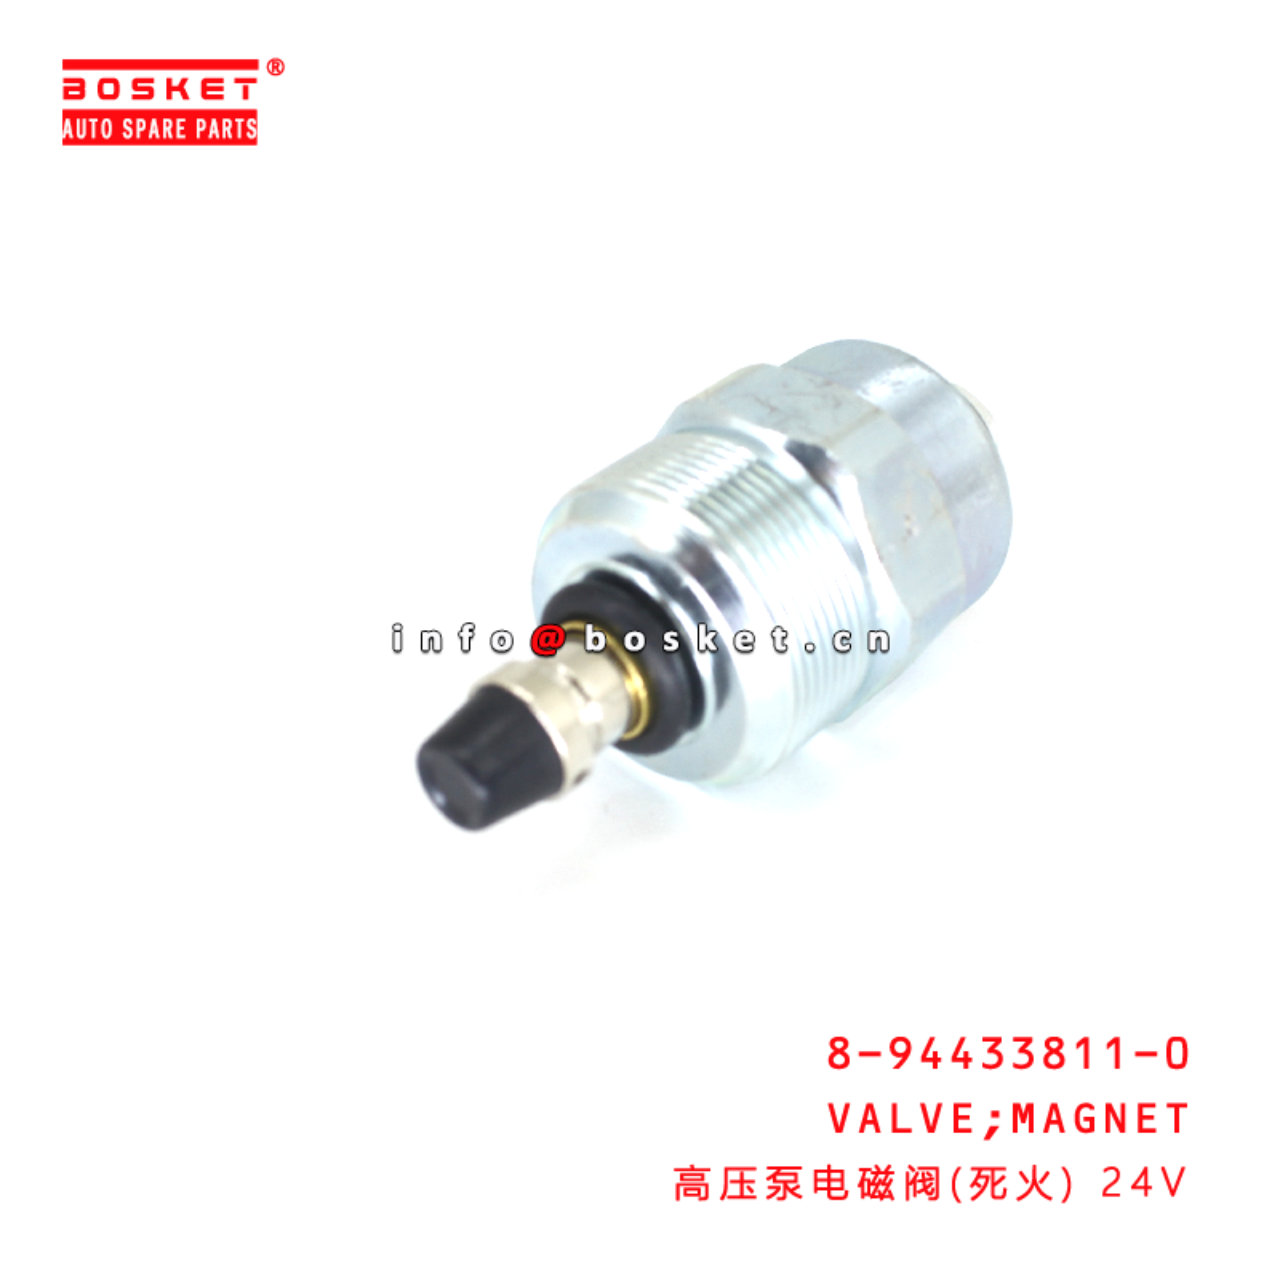 8-94433811-0 Injection Pump Engine Stop Magnetic Valve suitable for ISUZU NPR58 4BE1 8944338110